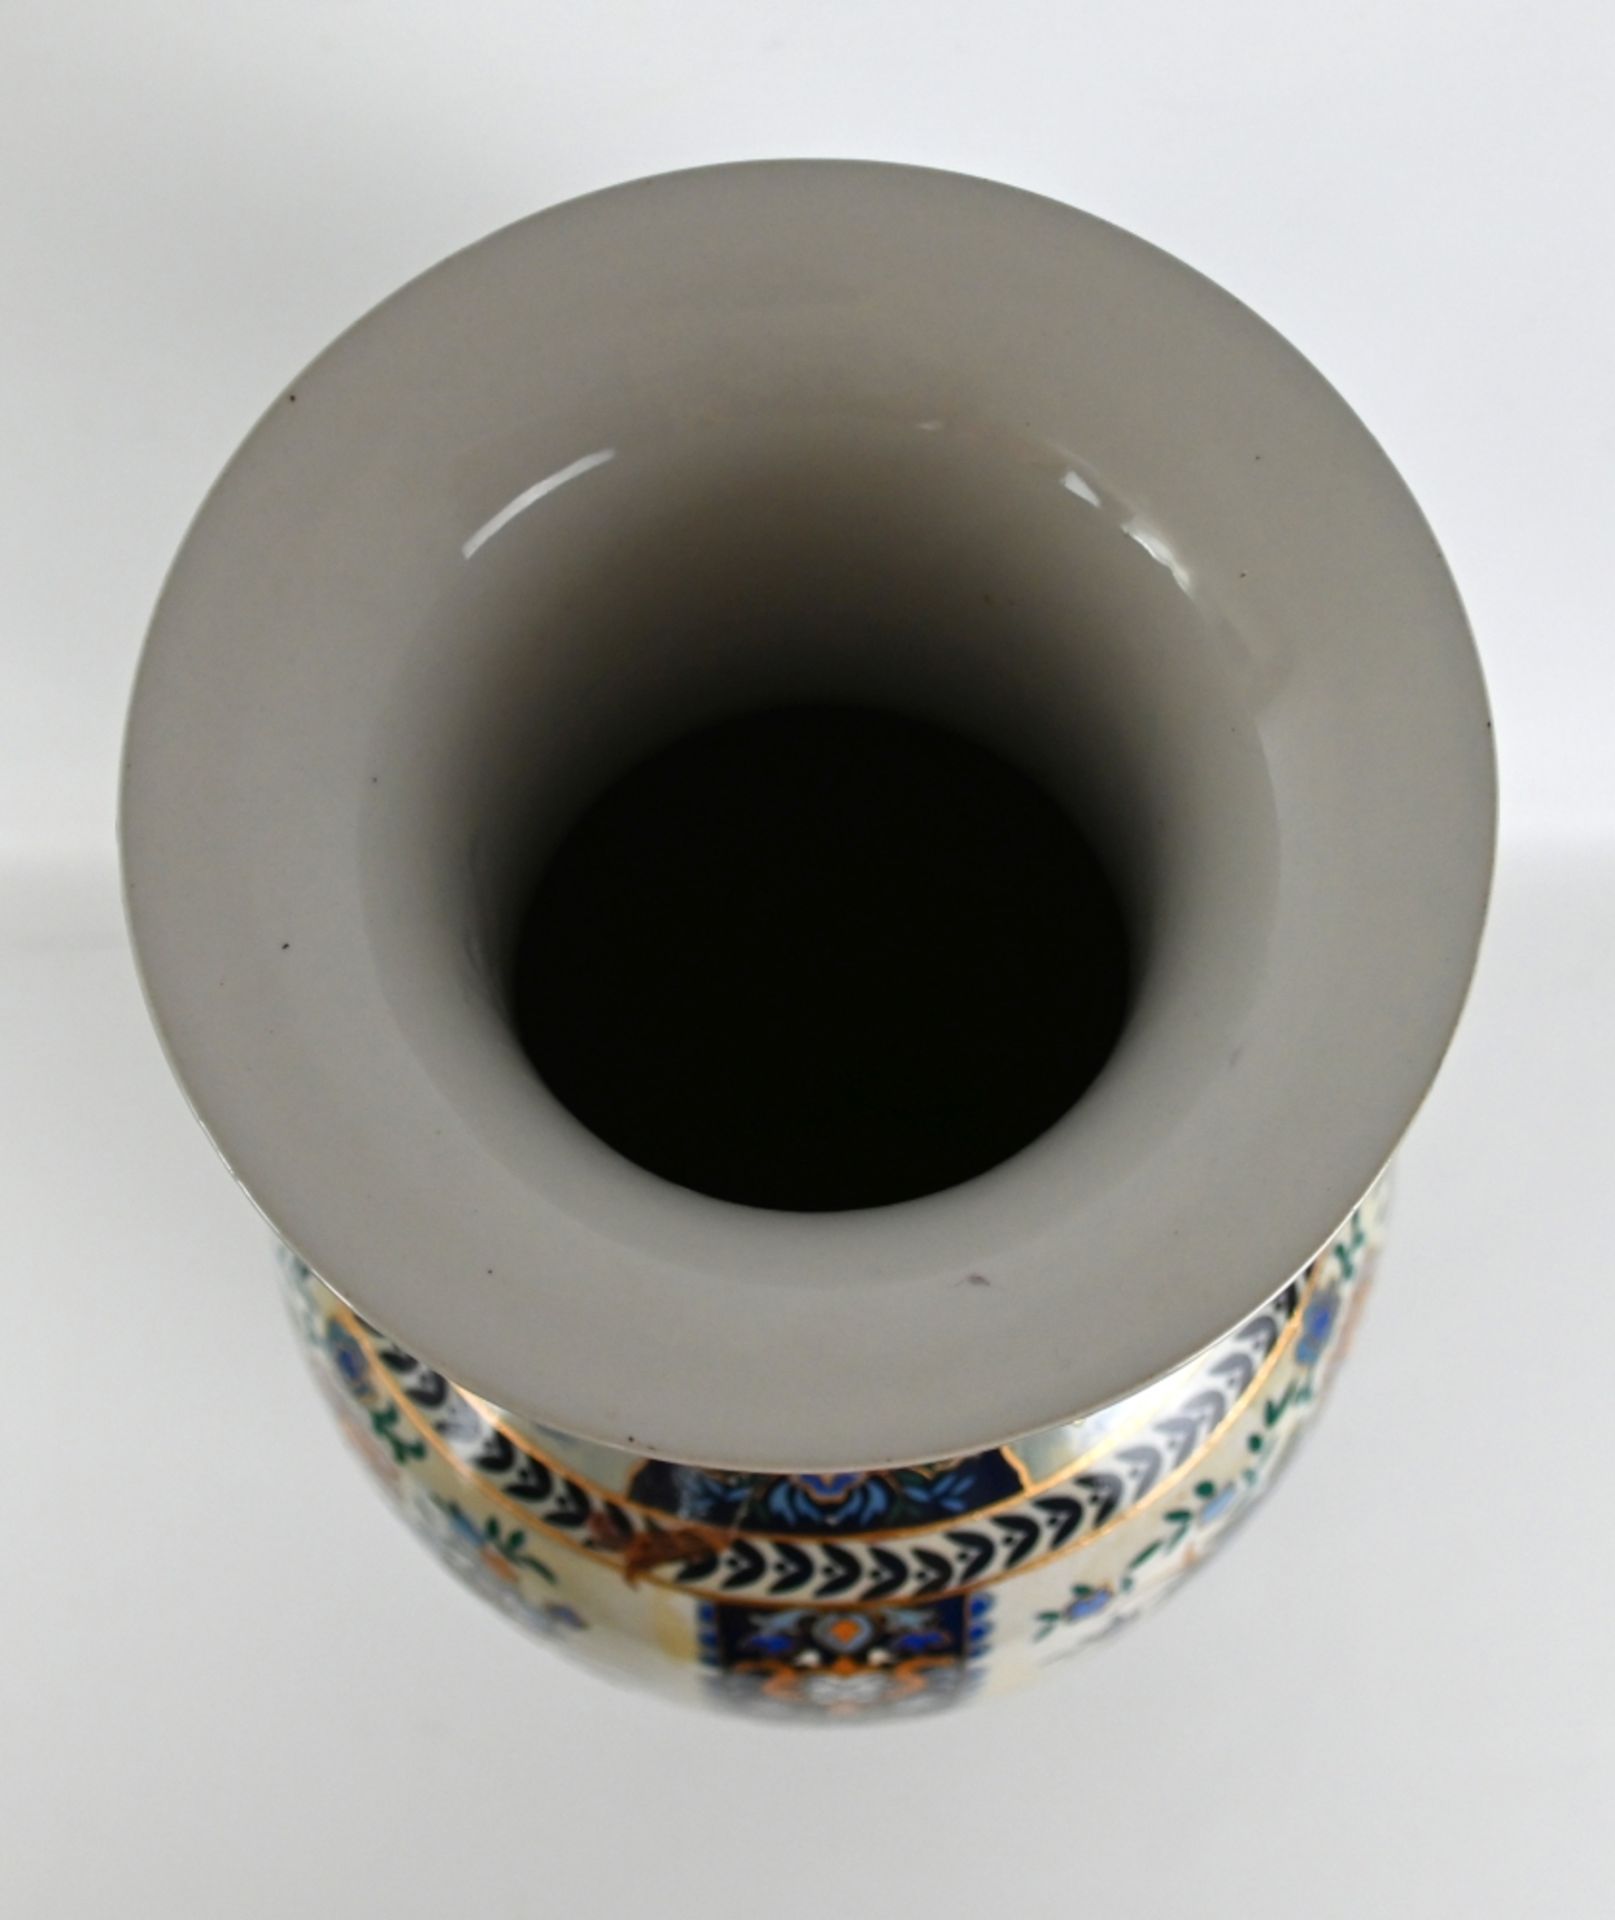 BODENVASE - Image 3 of 3